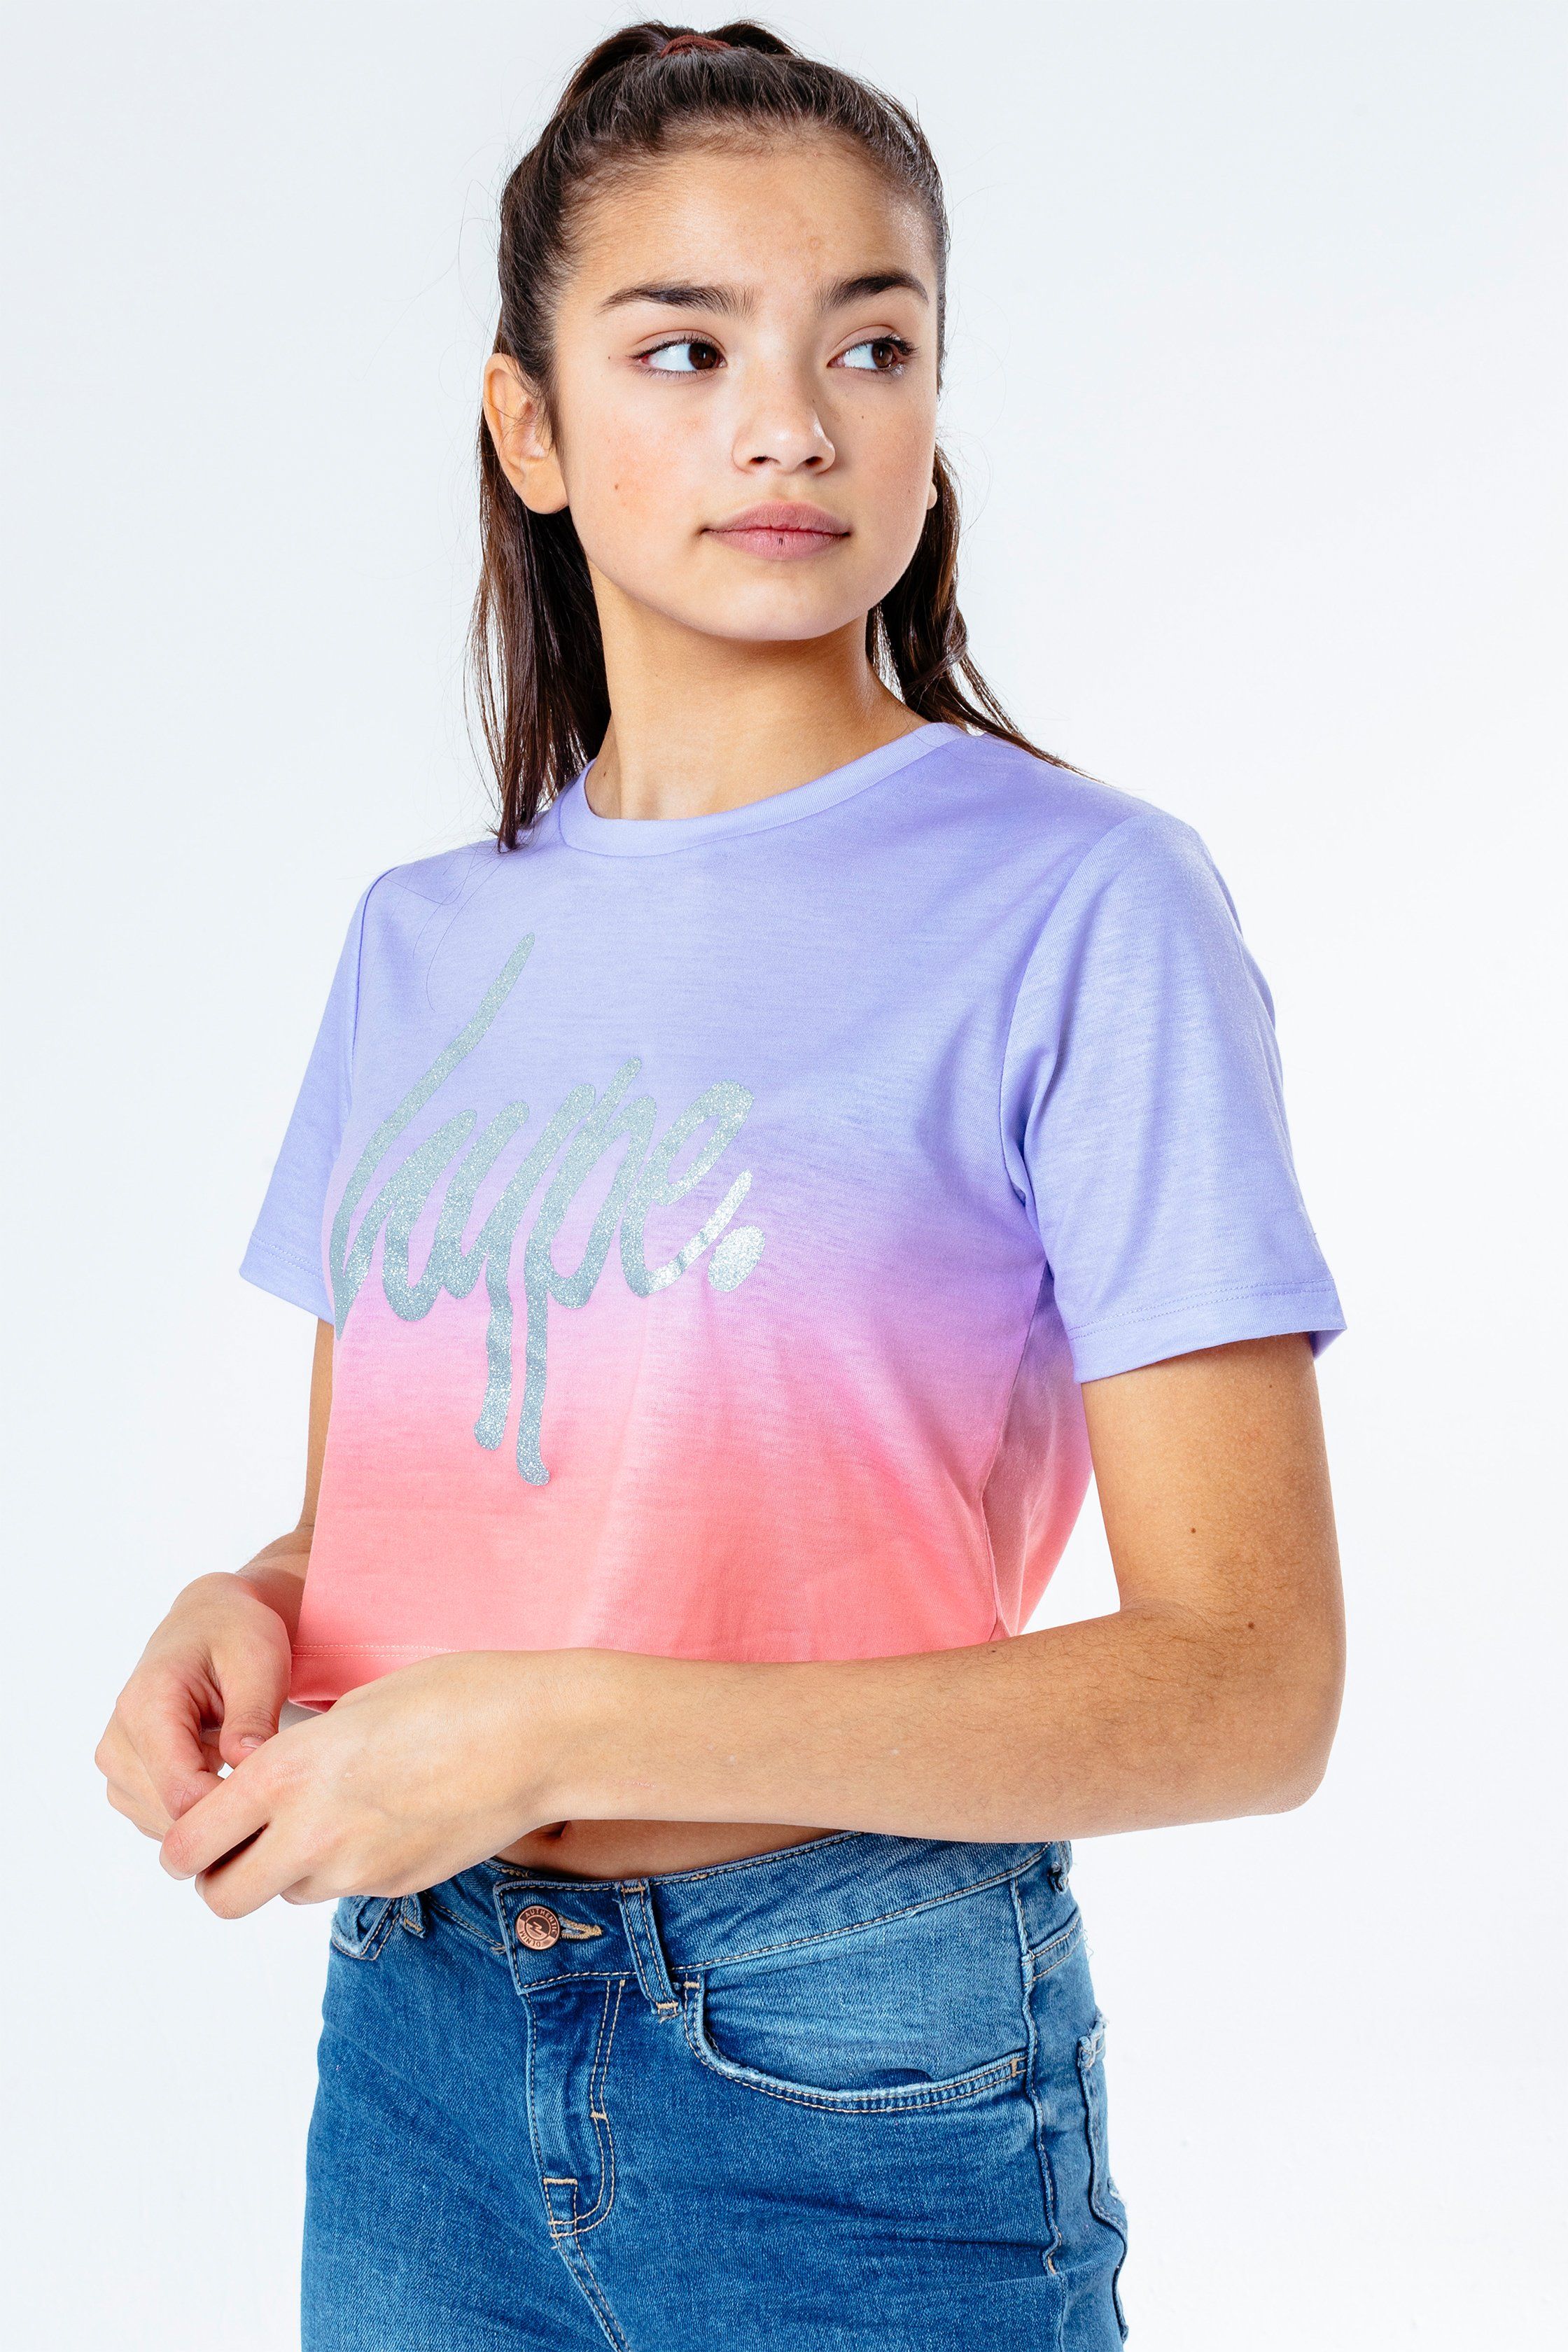 The HYPE. Peach Fade Kids Crop T-Shirt is your new go-to tee. Designed in a 95% polyester and 5% elastane fabric base for supreme comfort in our standard crop t-shirt shape, highlighting a crew neck line and short sleeves. With an all-over signature fade effect in a lilac and peach colour palette. Finished with the iconic HYPE. script logo in a contrasting silver. Wear with the matching leggings to complete the look. Machine wash at 30 degrees.